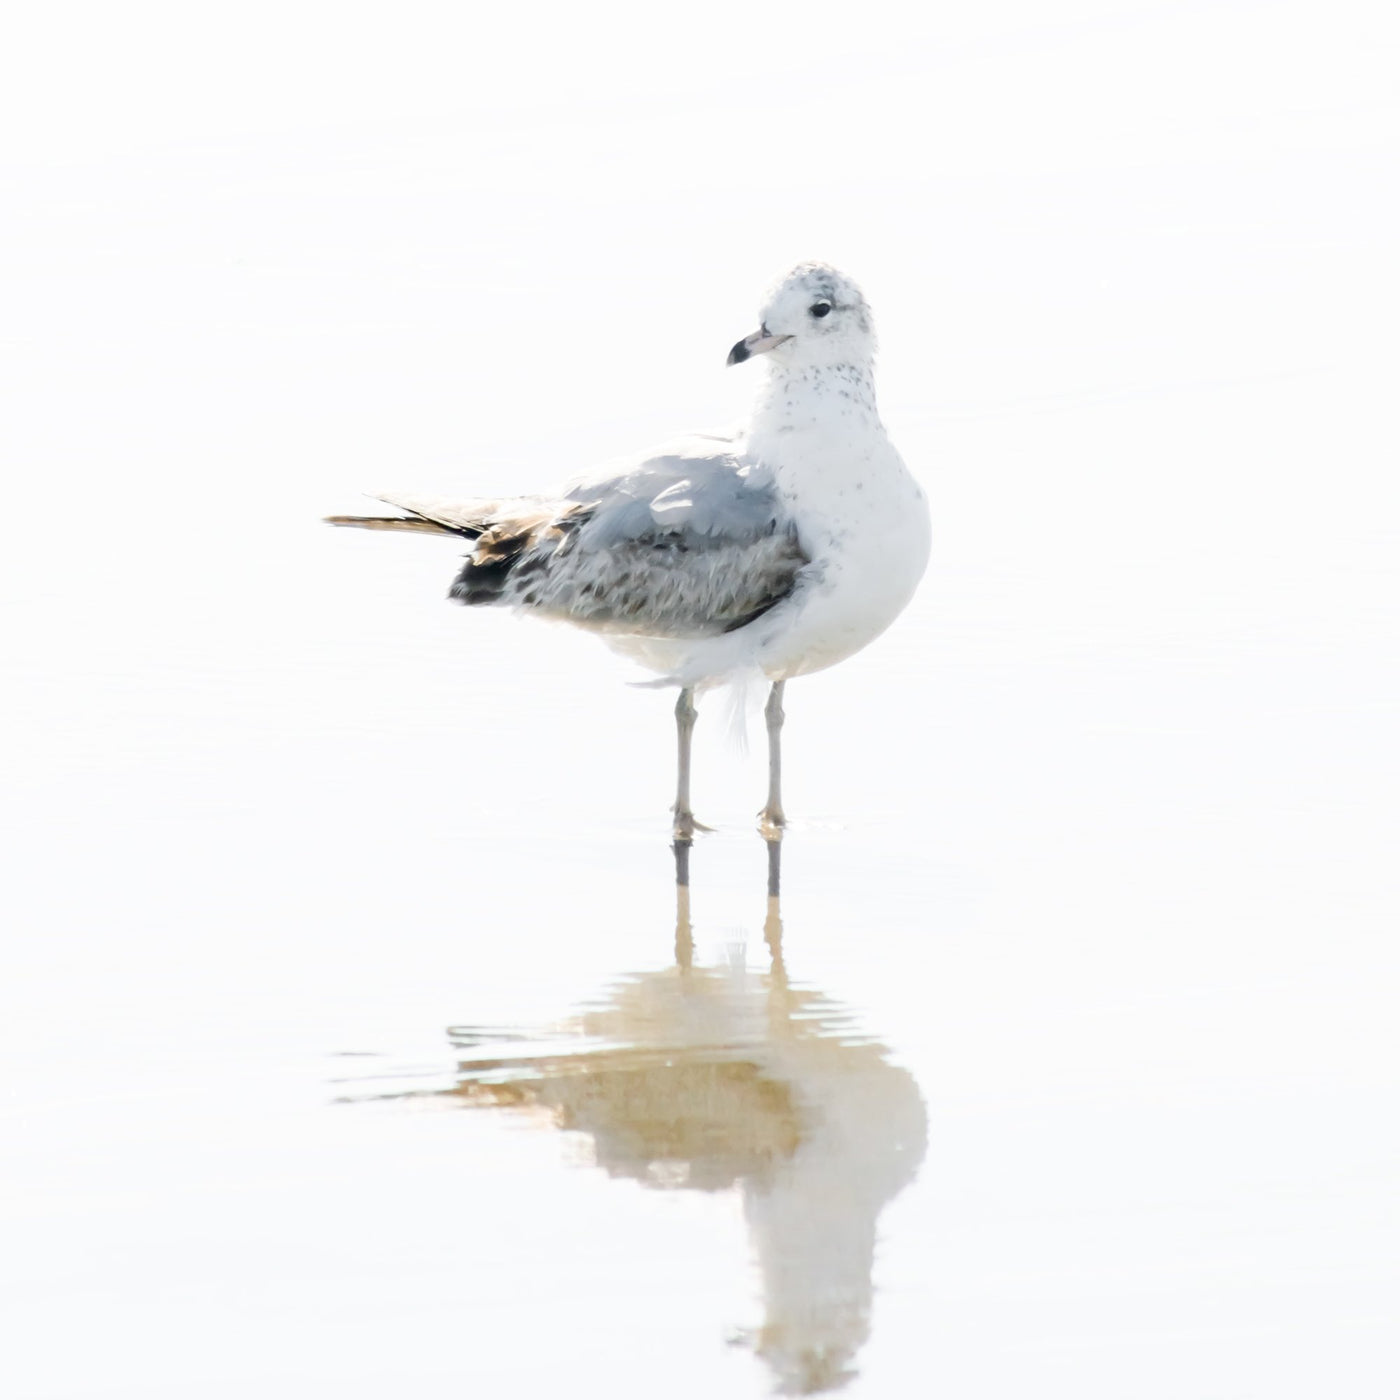 Seagull No 14 - Fine art print by Cattie Coyle Photography